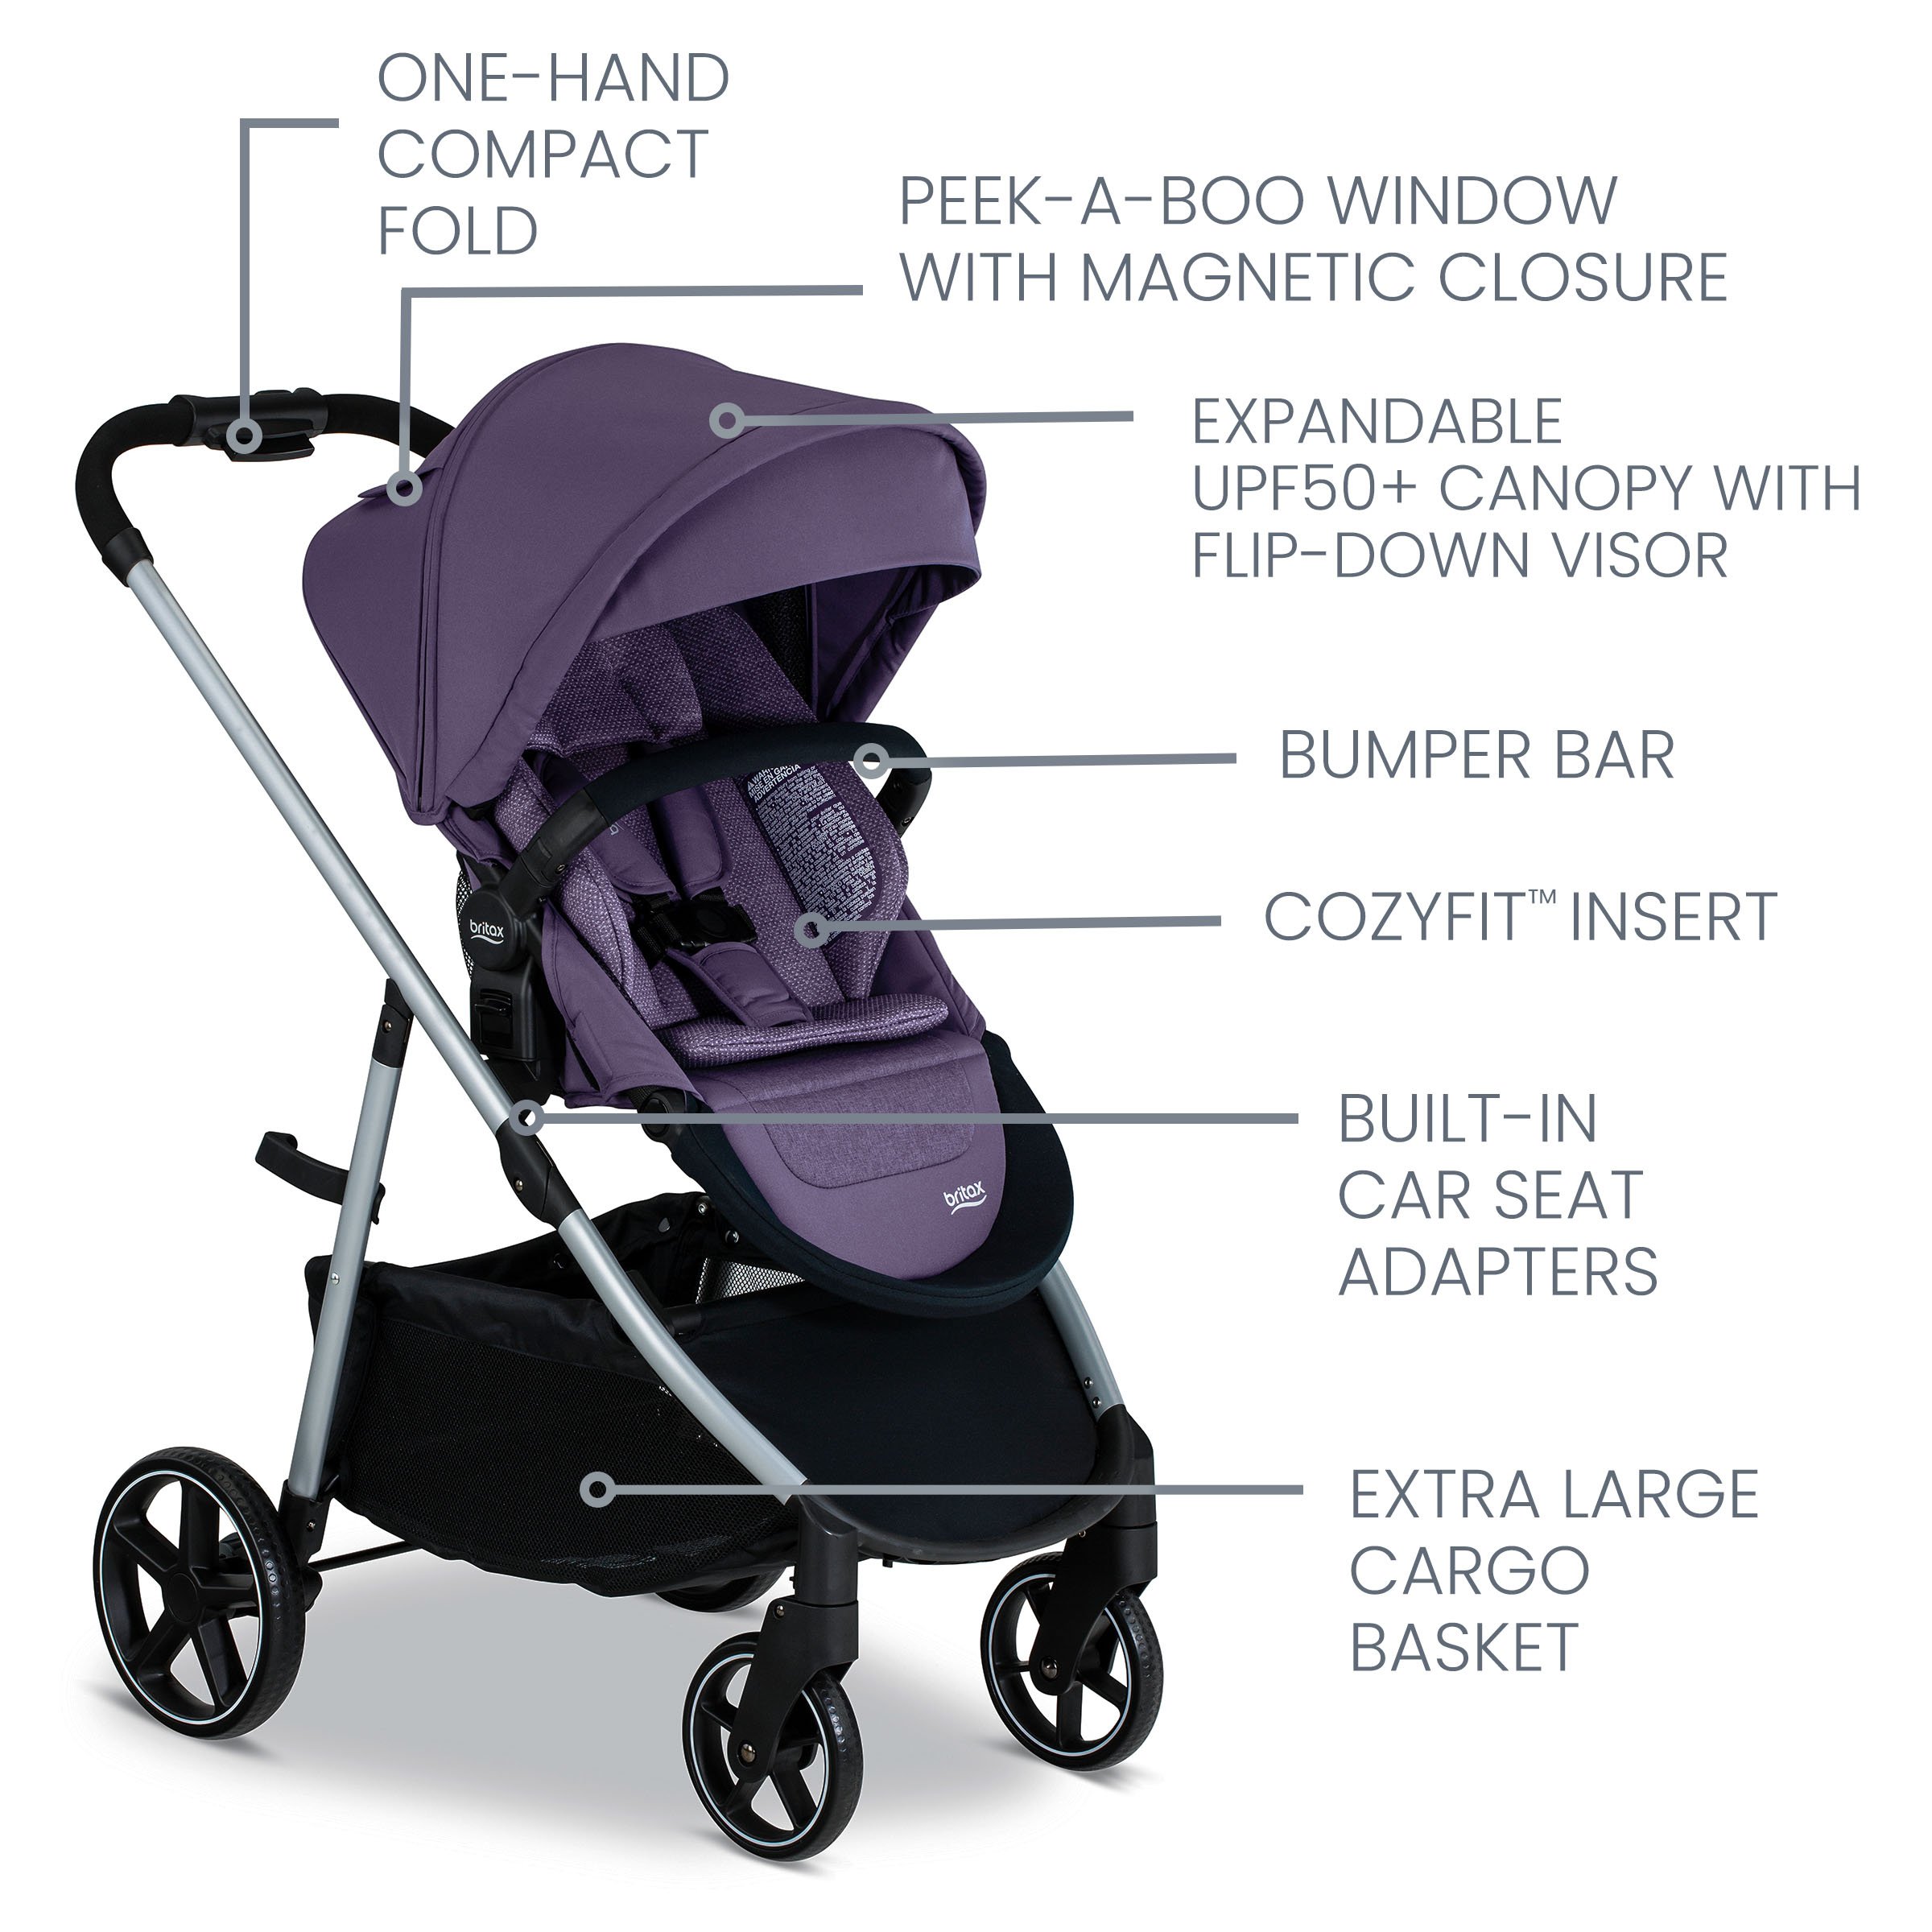 Grove Stroller Features labeled on Pindot Iris fashion